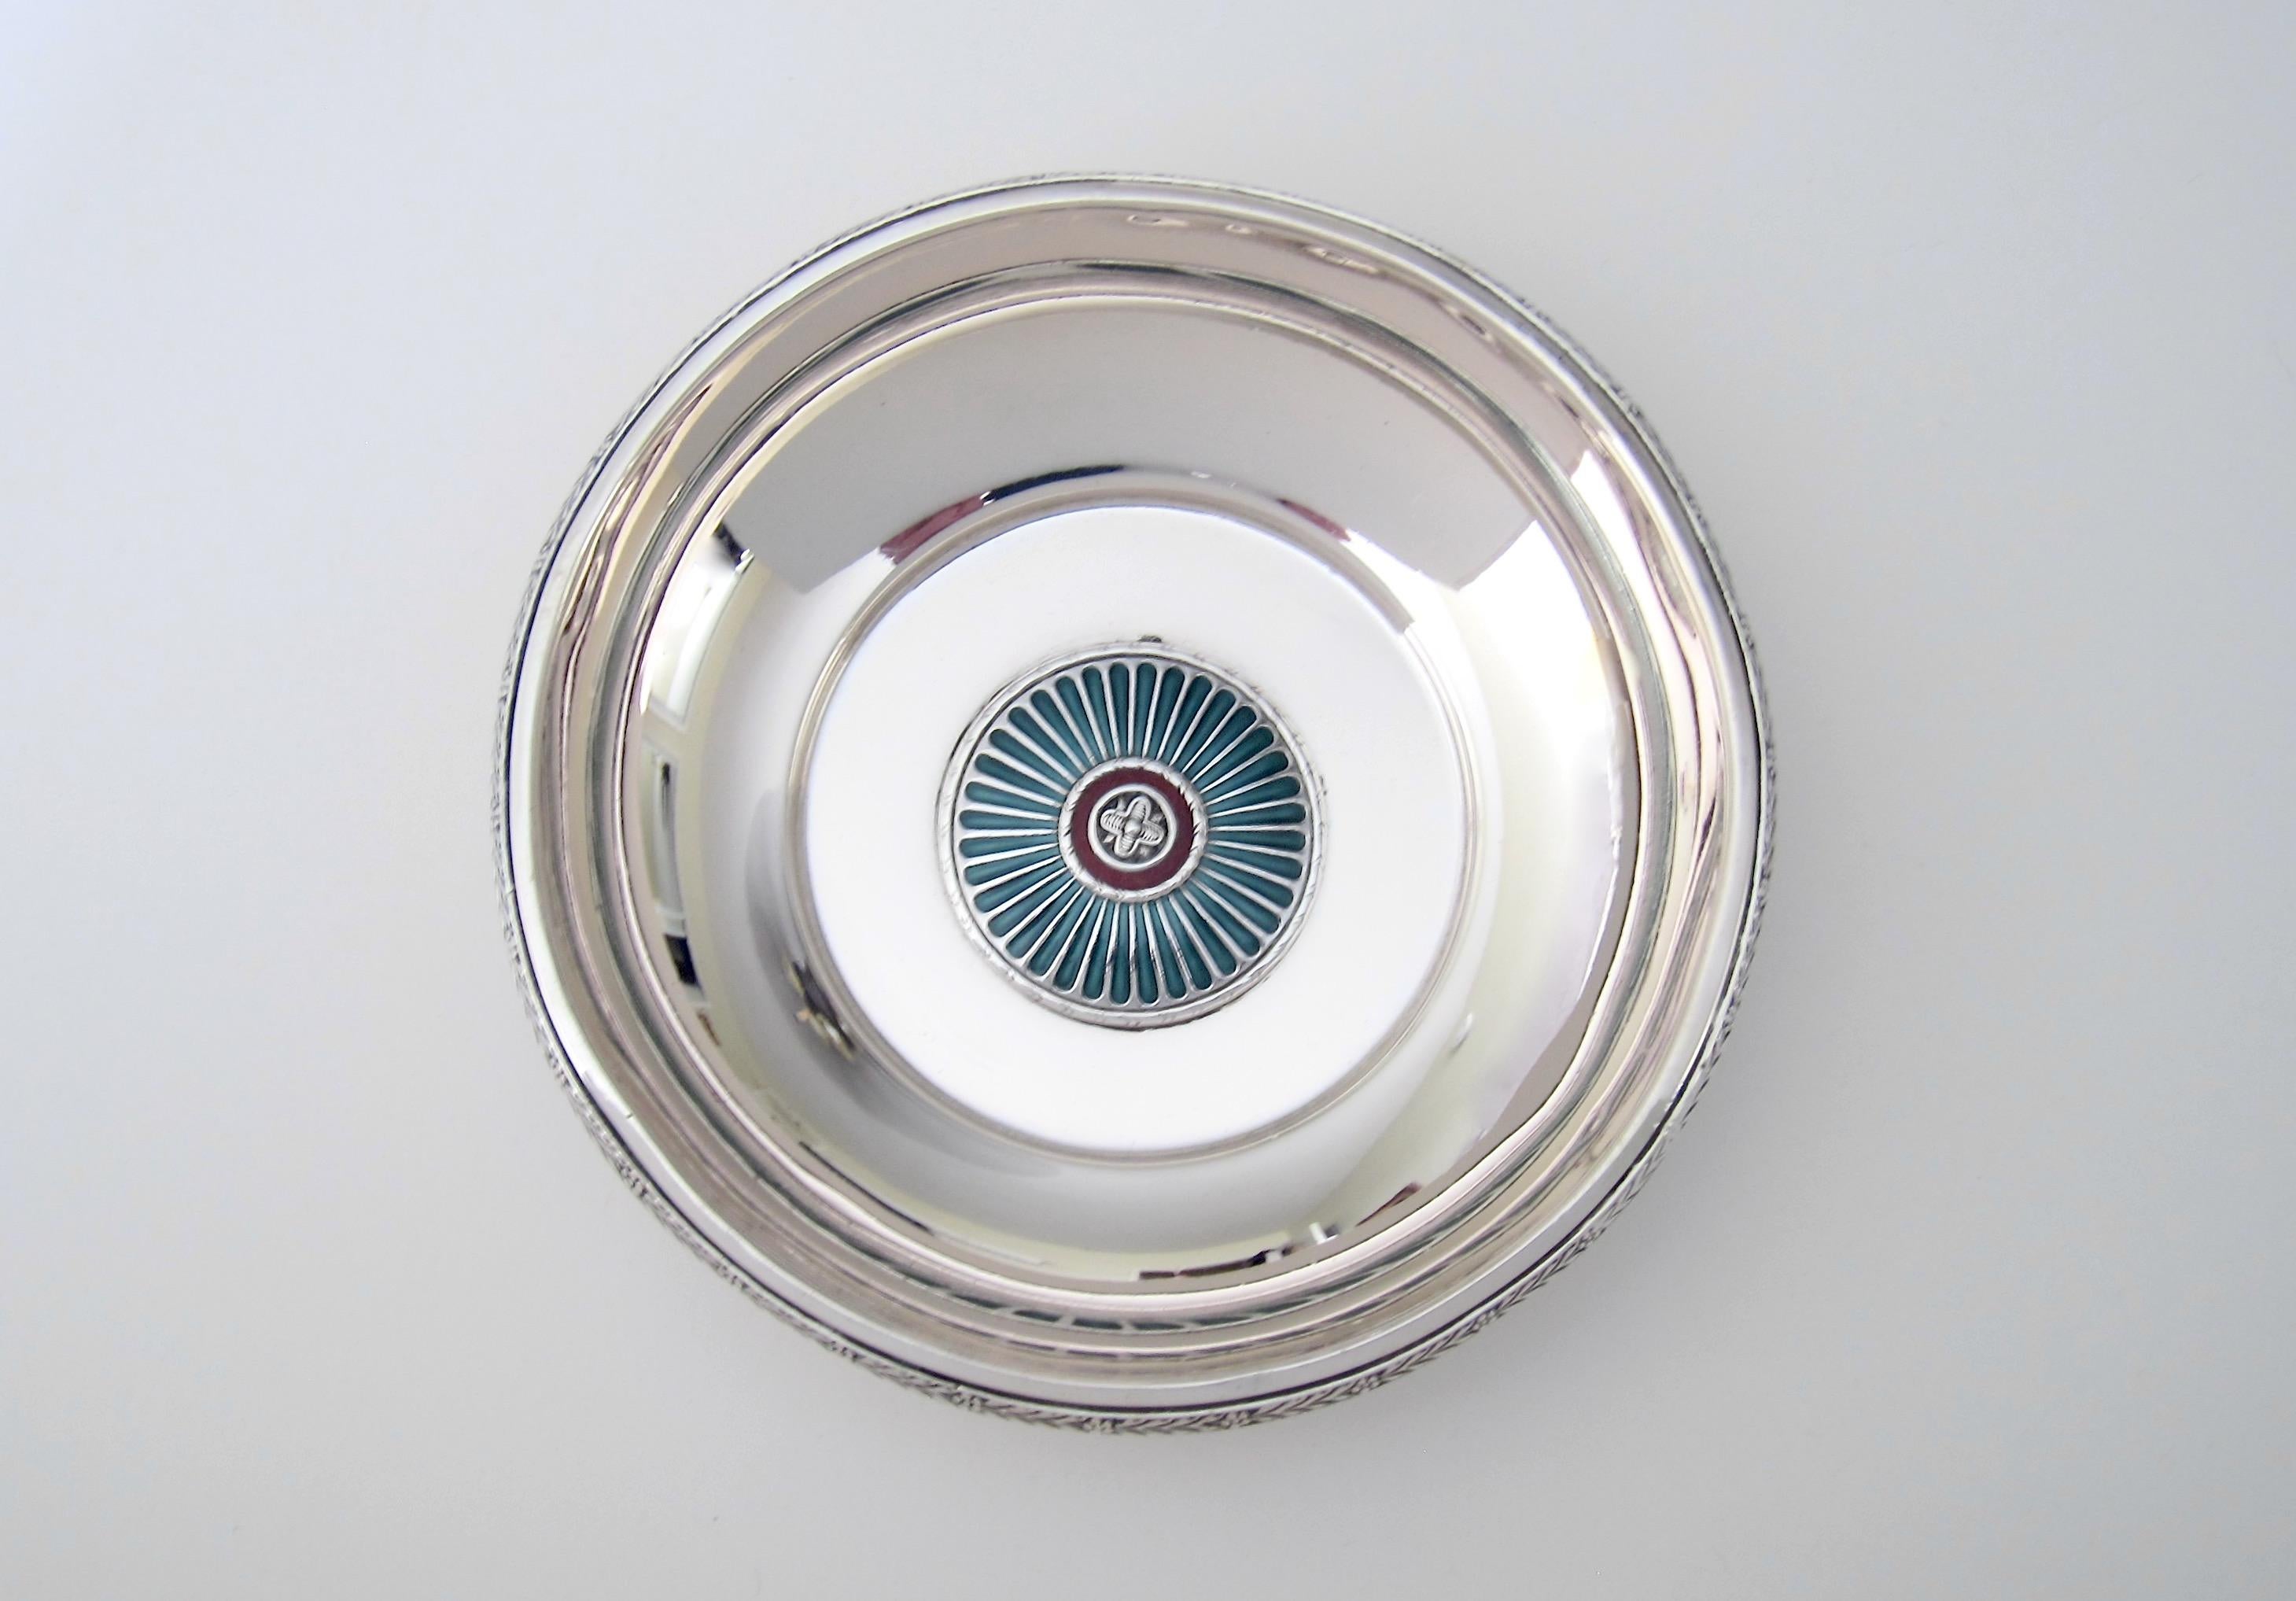 An Art Deco period dish or wine bottle coaster in silver and enamel from Norwegian silversmith, David Andersen of Oslo, dating to the early 1920s. The jewel-toned enamelwork consists of a round, central medallion with a deep red band of guilloche